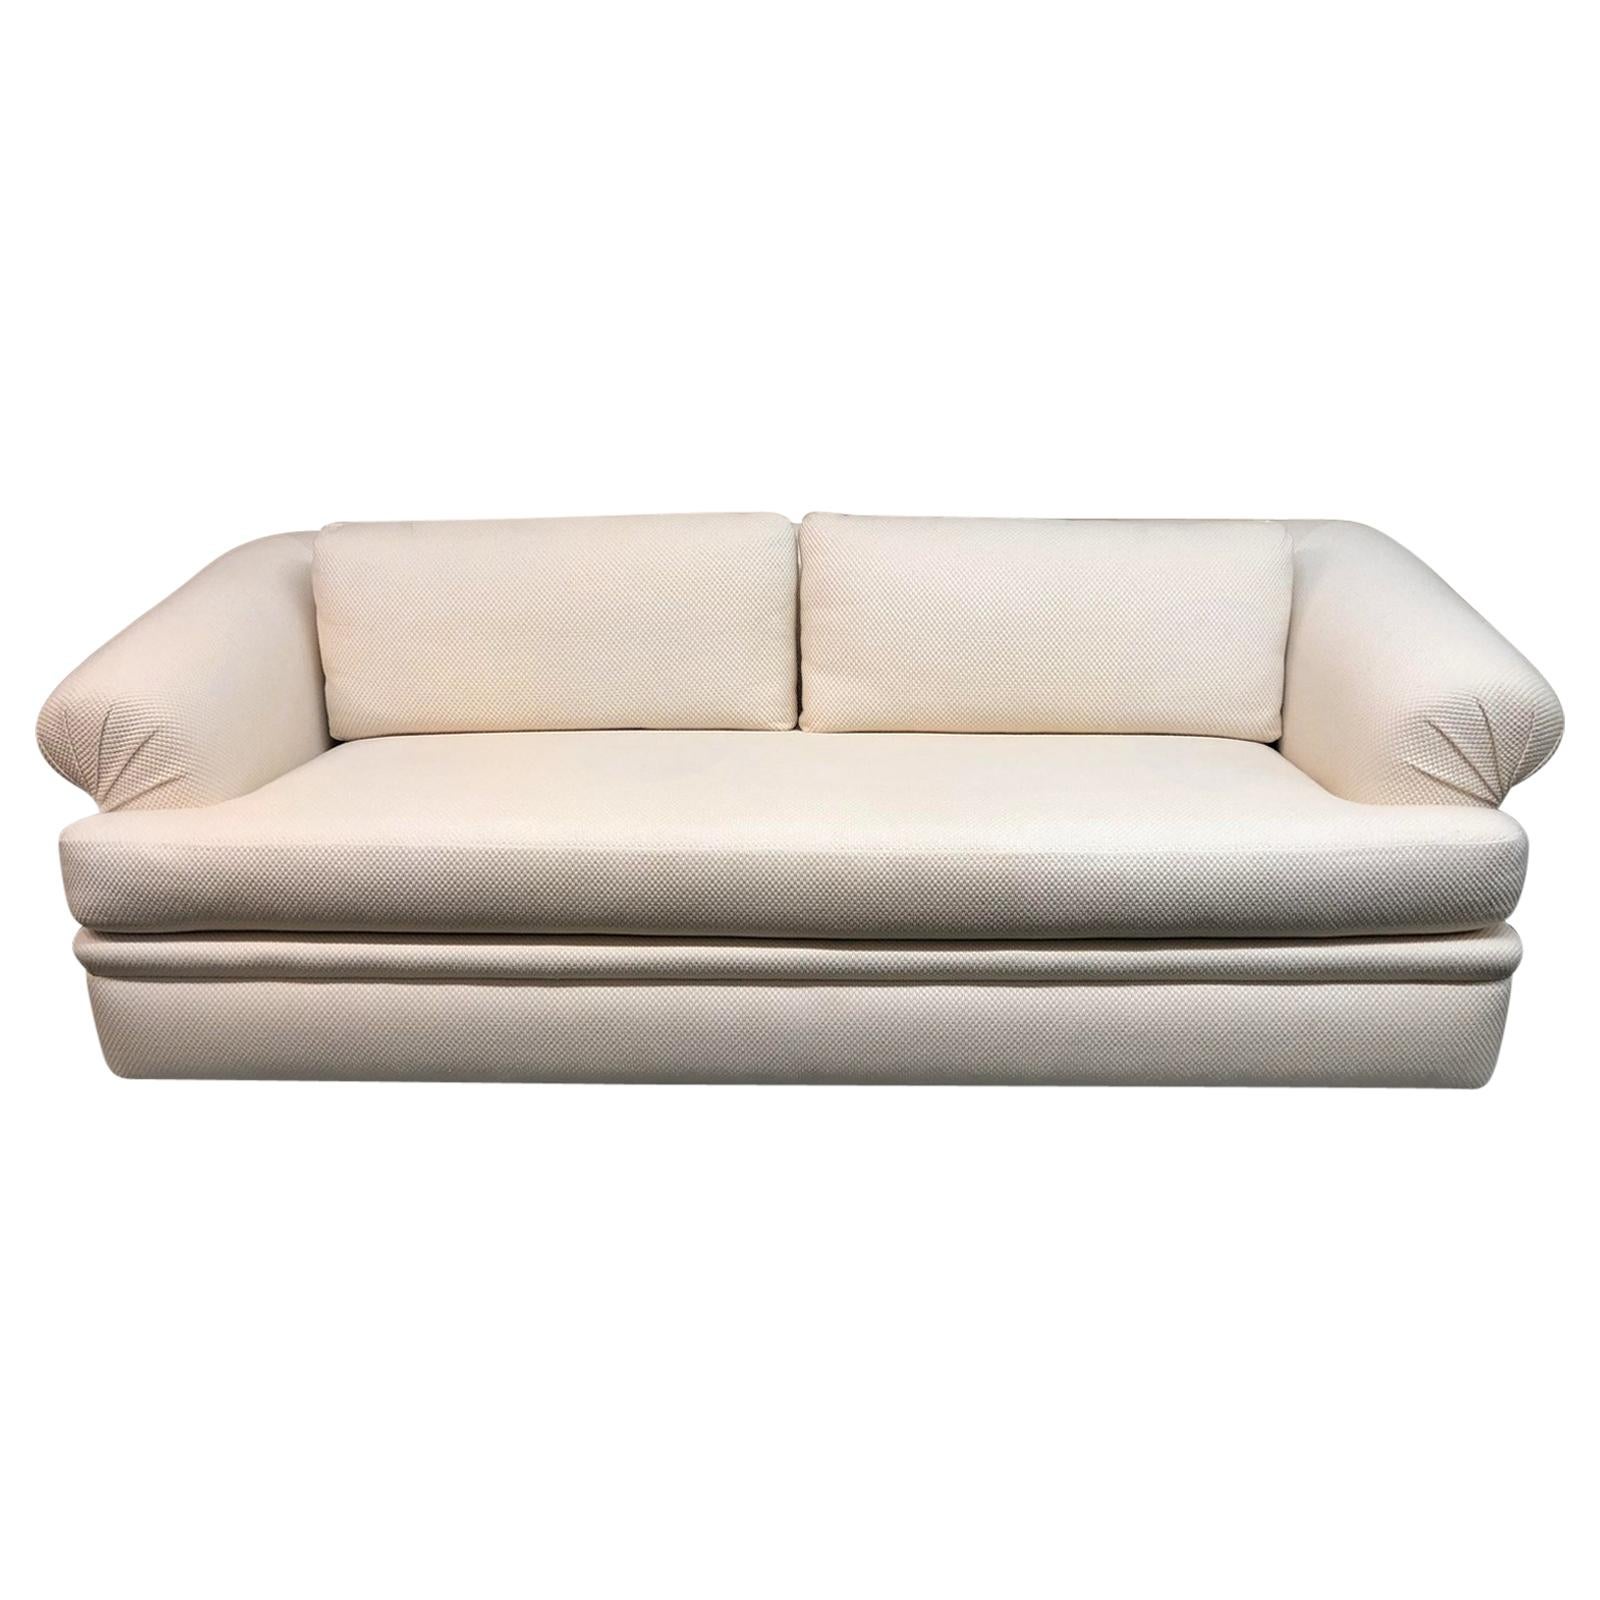 A.Rudin Off-White Upholstered Sofa For Sale